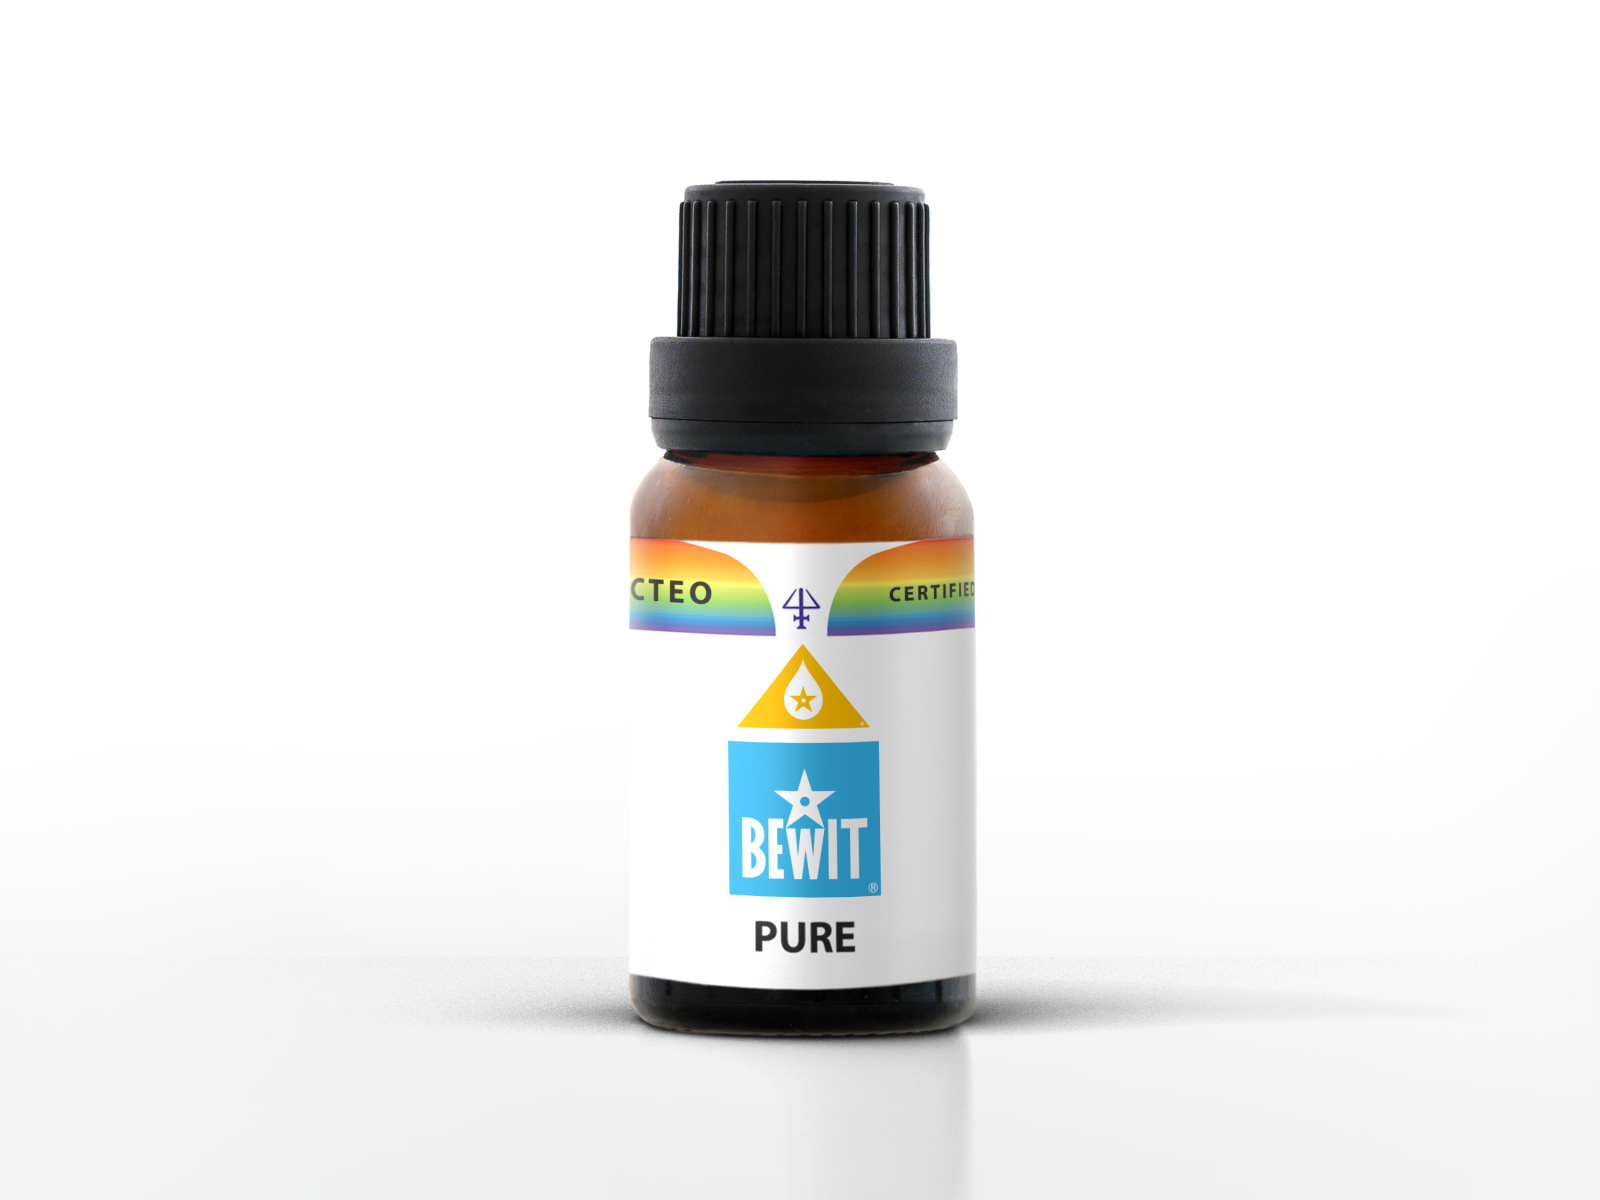 BEWIT PURE - A special blend of the essential oils - 1